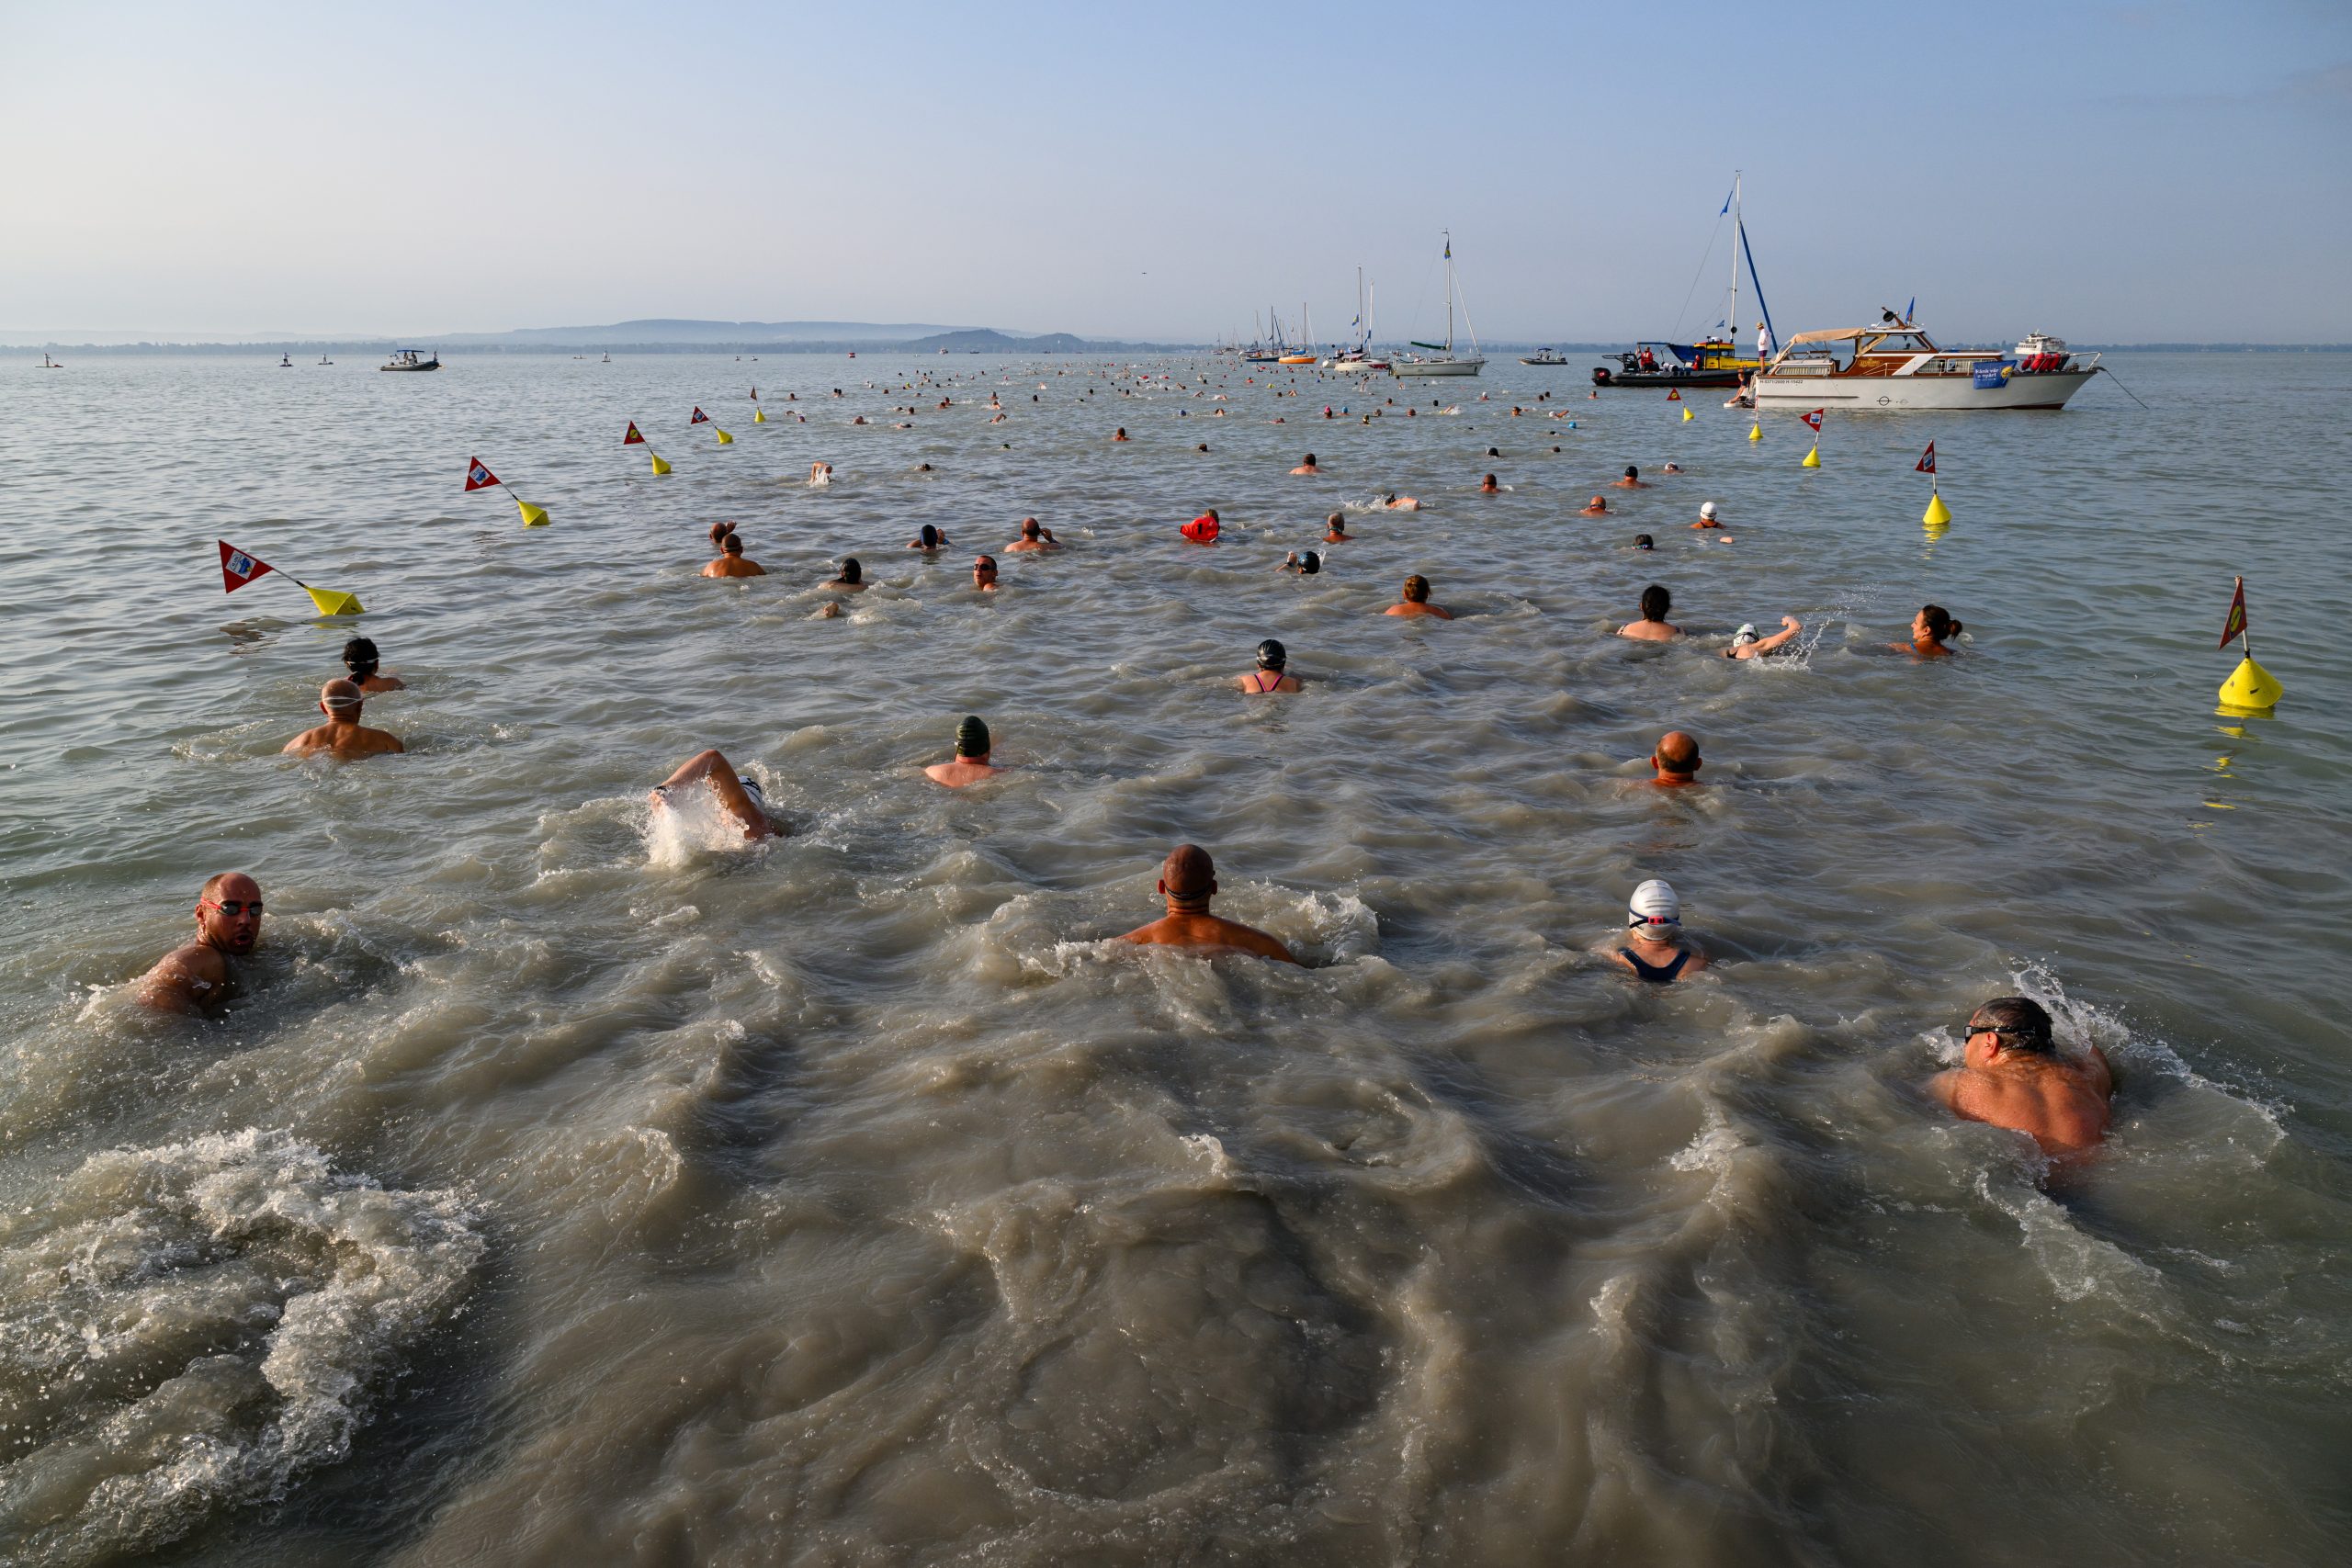 Over 11,000 People Attend This Year’s Balaton Cross Swimming [Video]